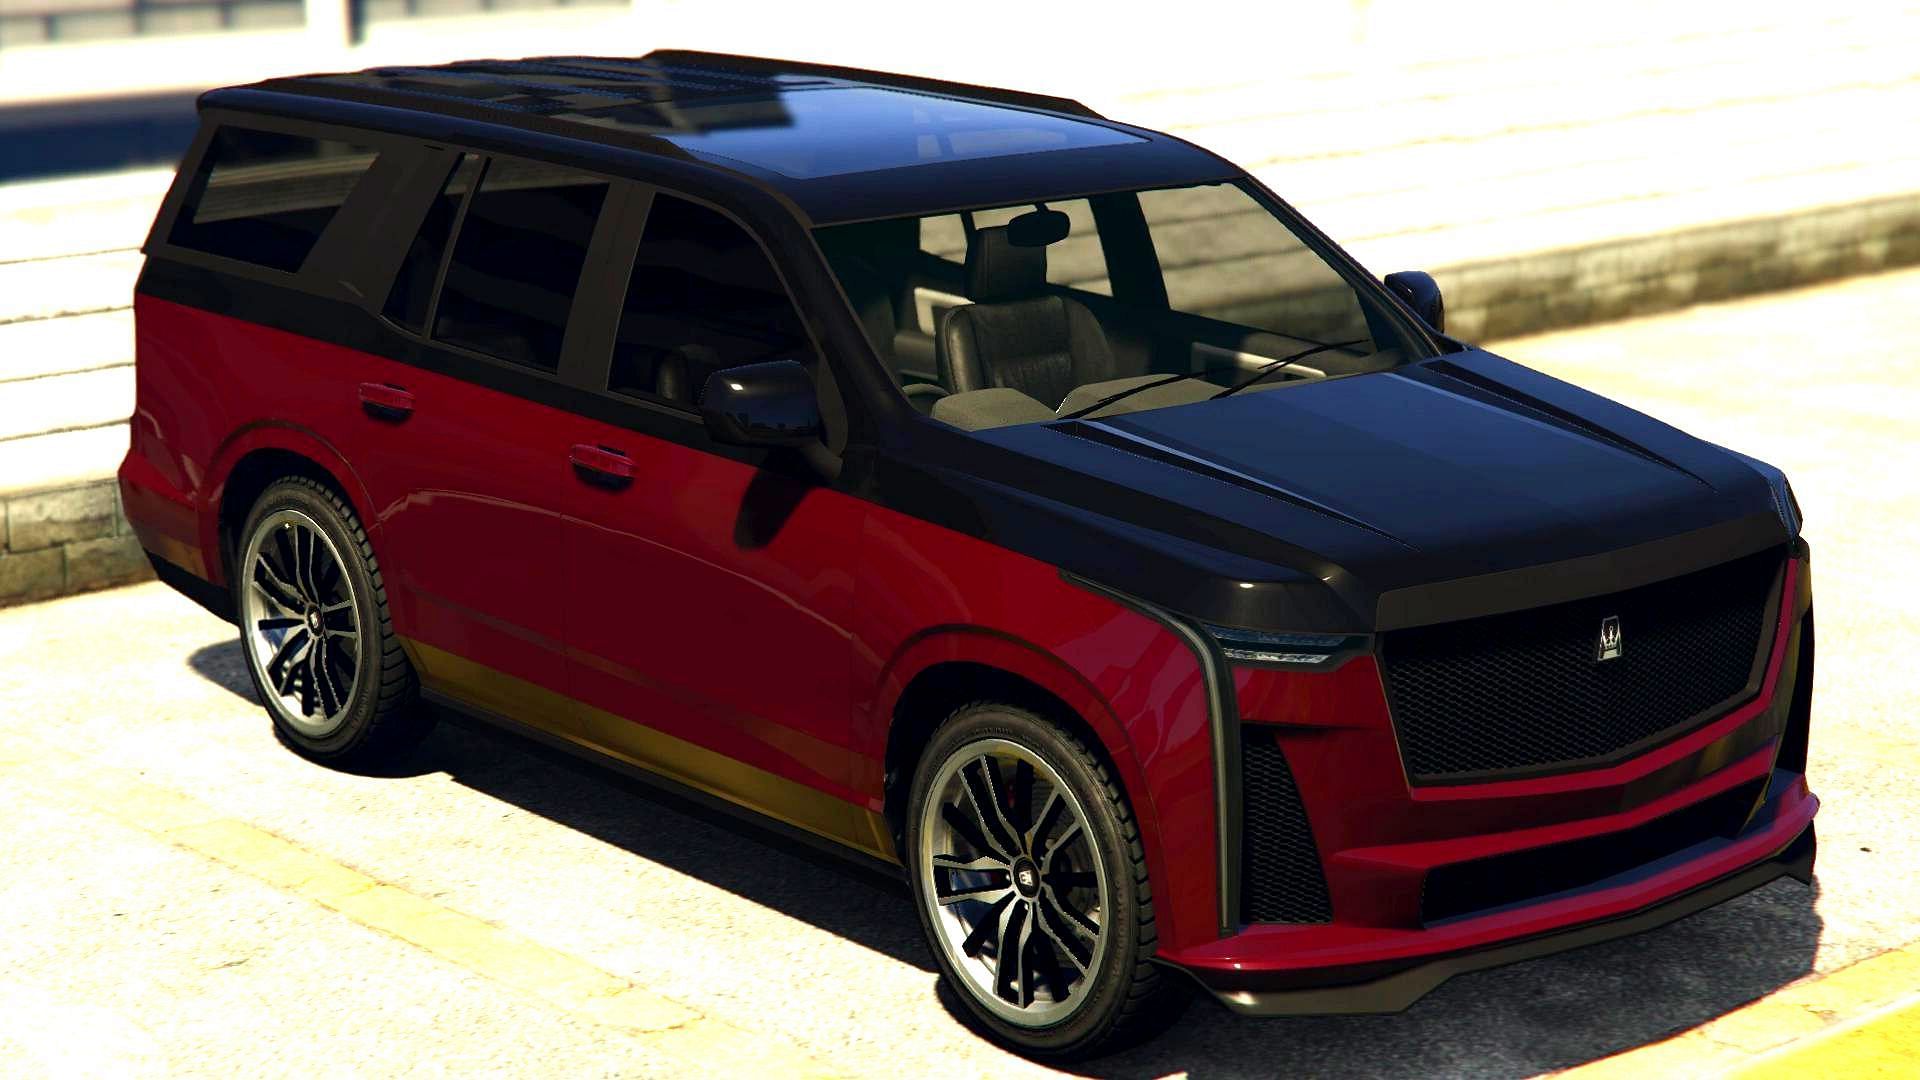 Albany Cavalcade XL debuts in GTA Online with the latest update